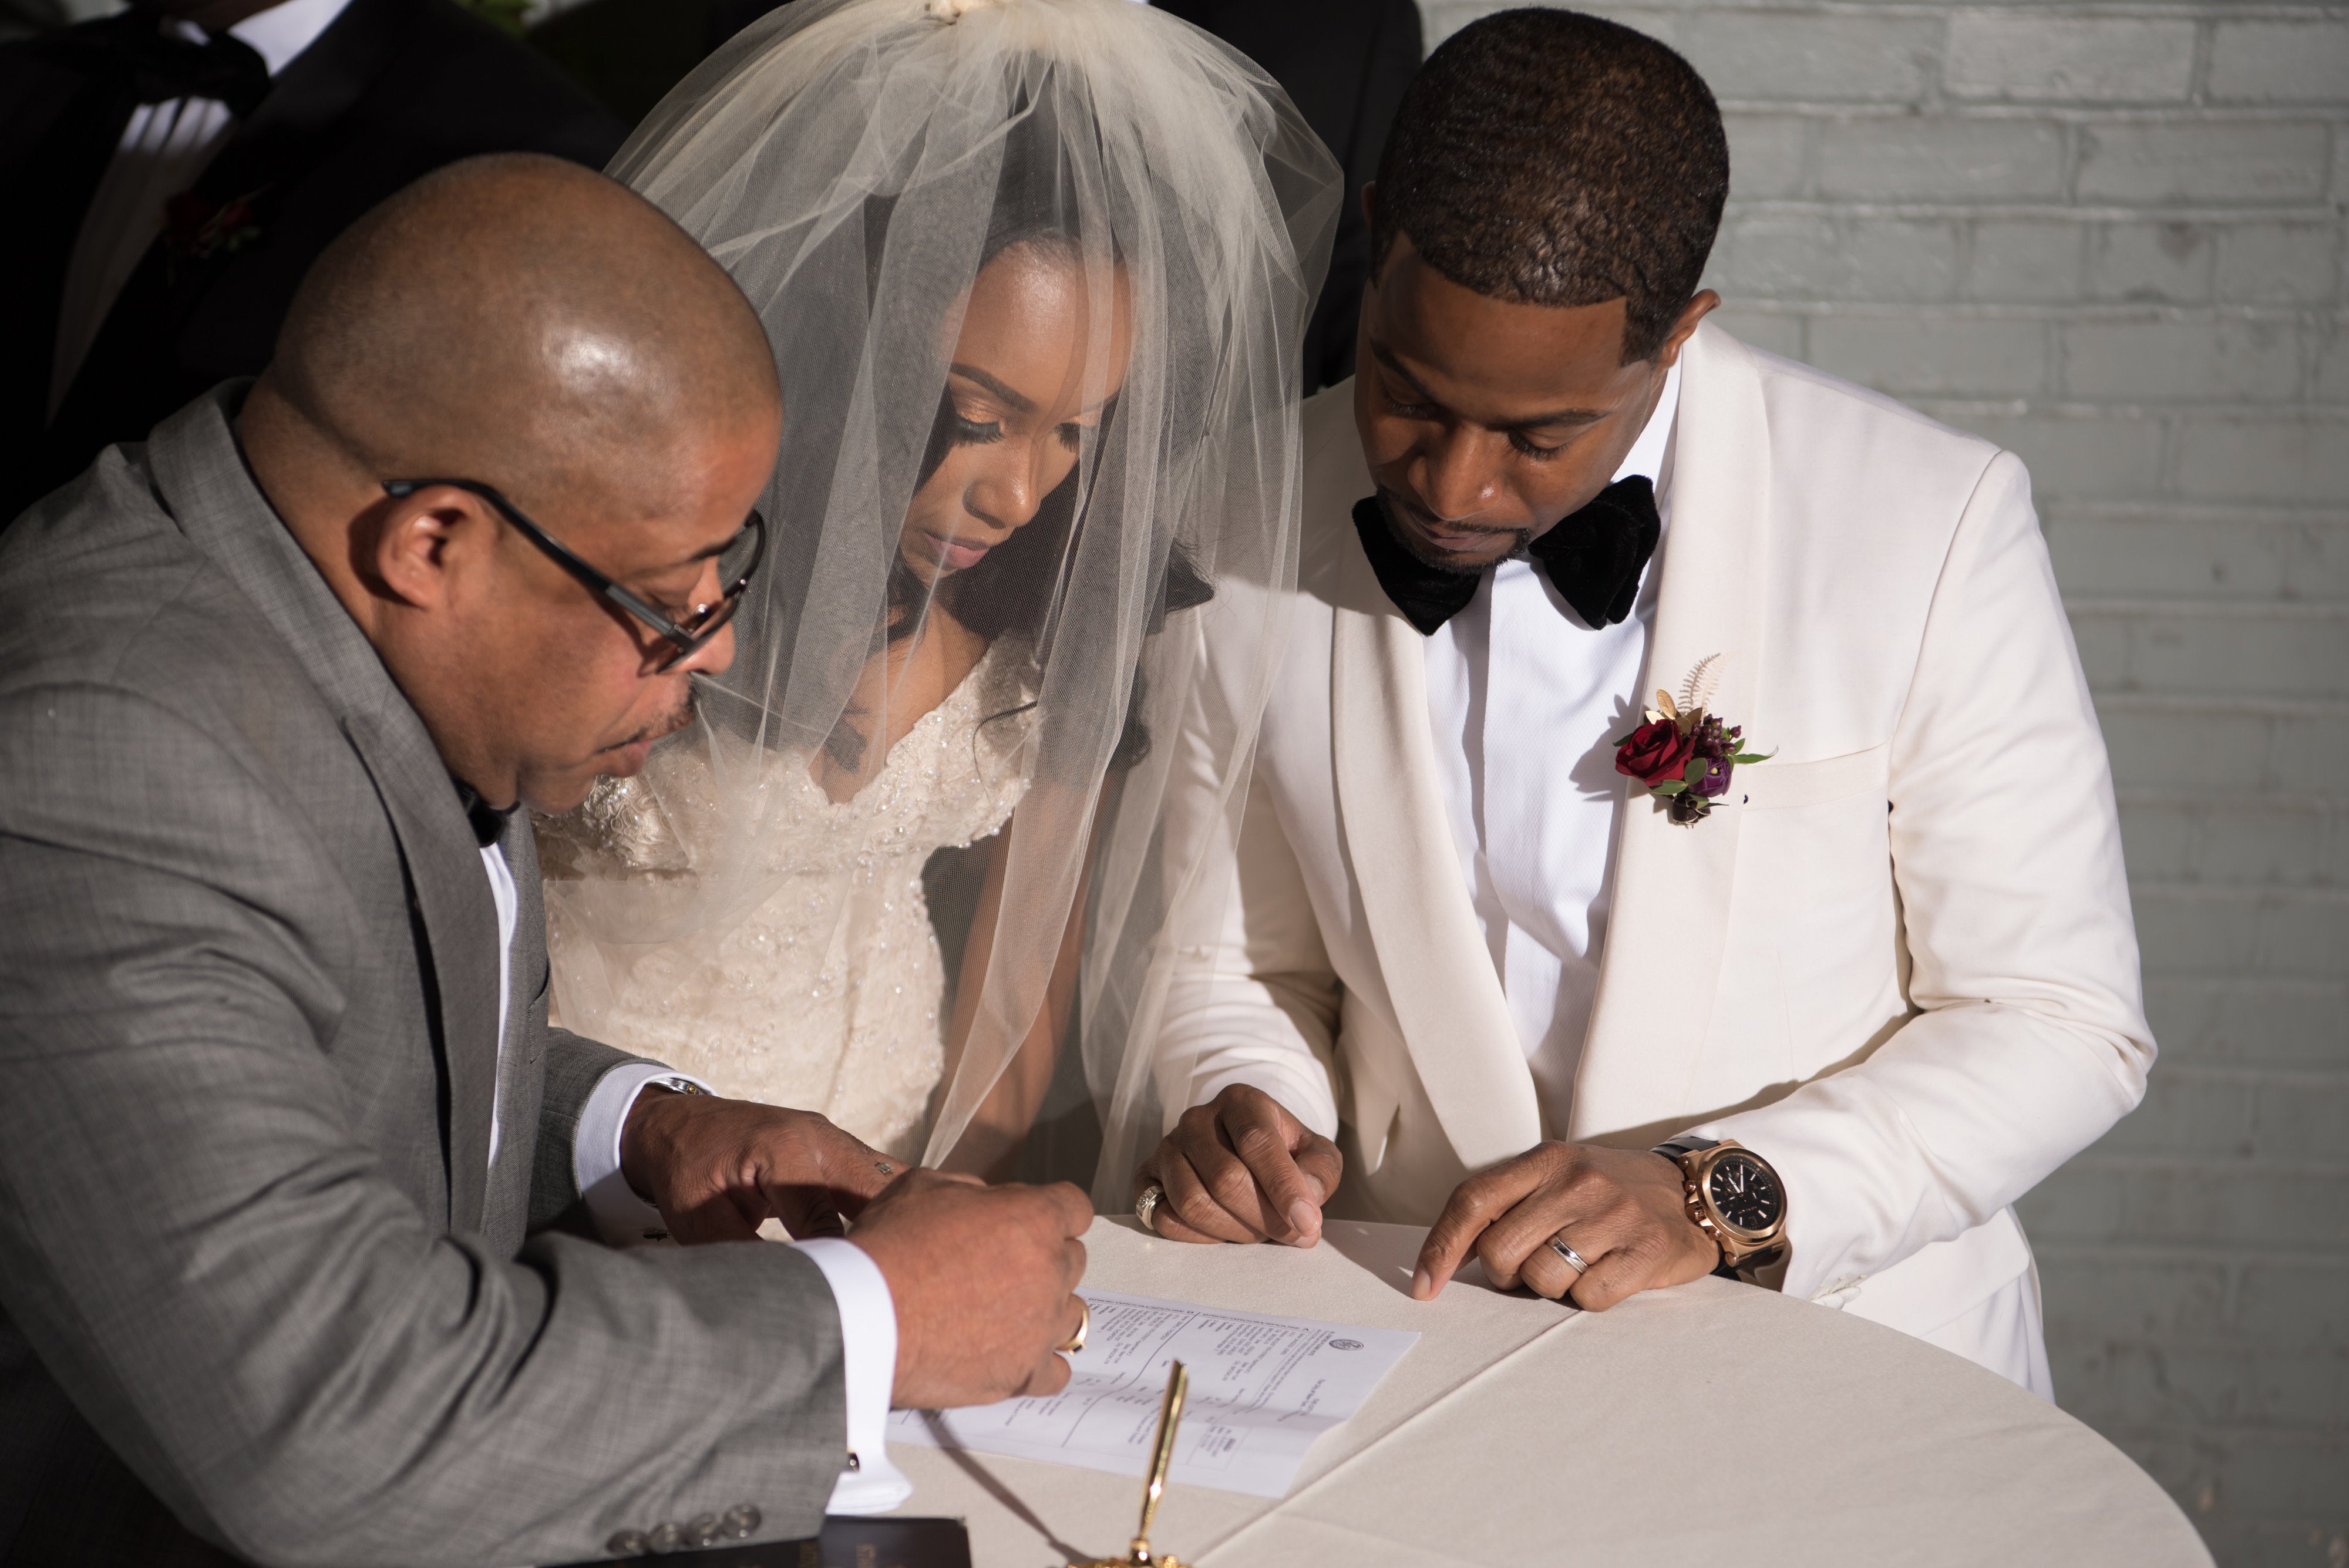 Bridal Bliss: Omari and Shadeen’s New York Wedding Was Filled With Classic Romance Vibes